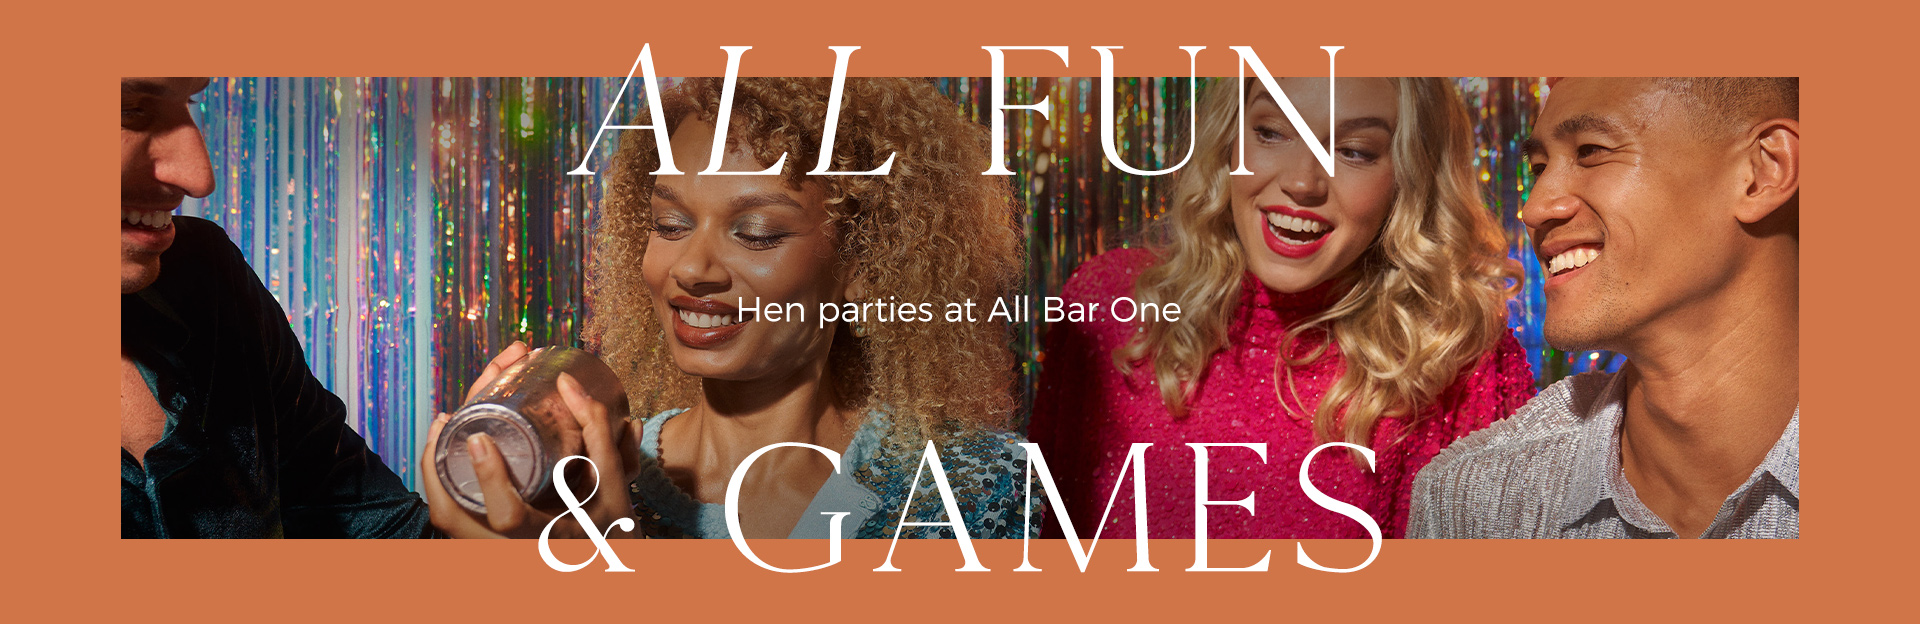 Hen parties at All Bar One Charing Cross